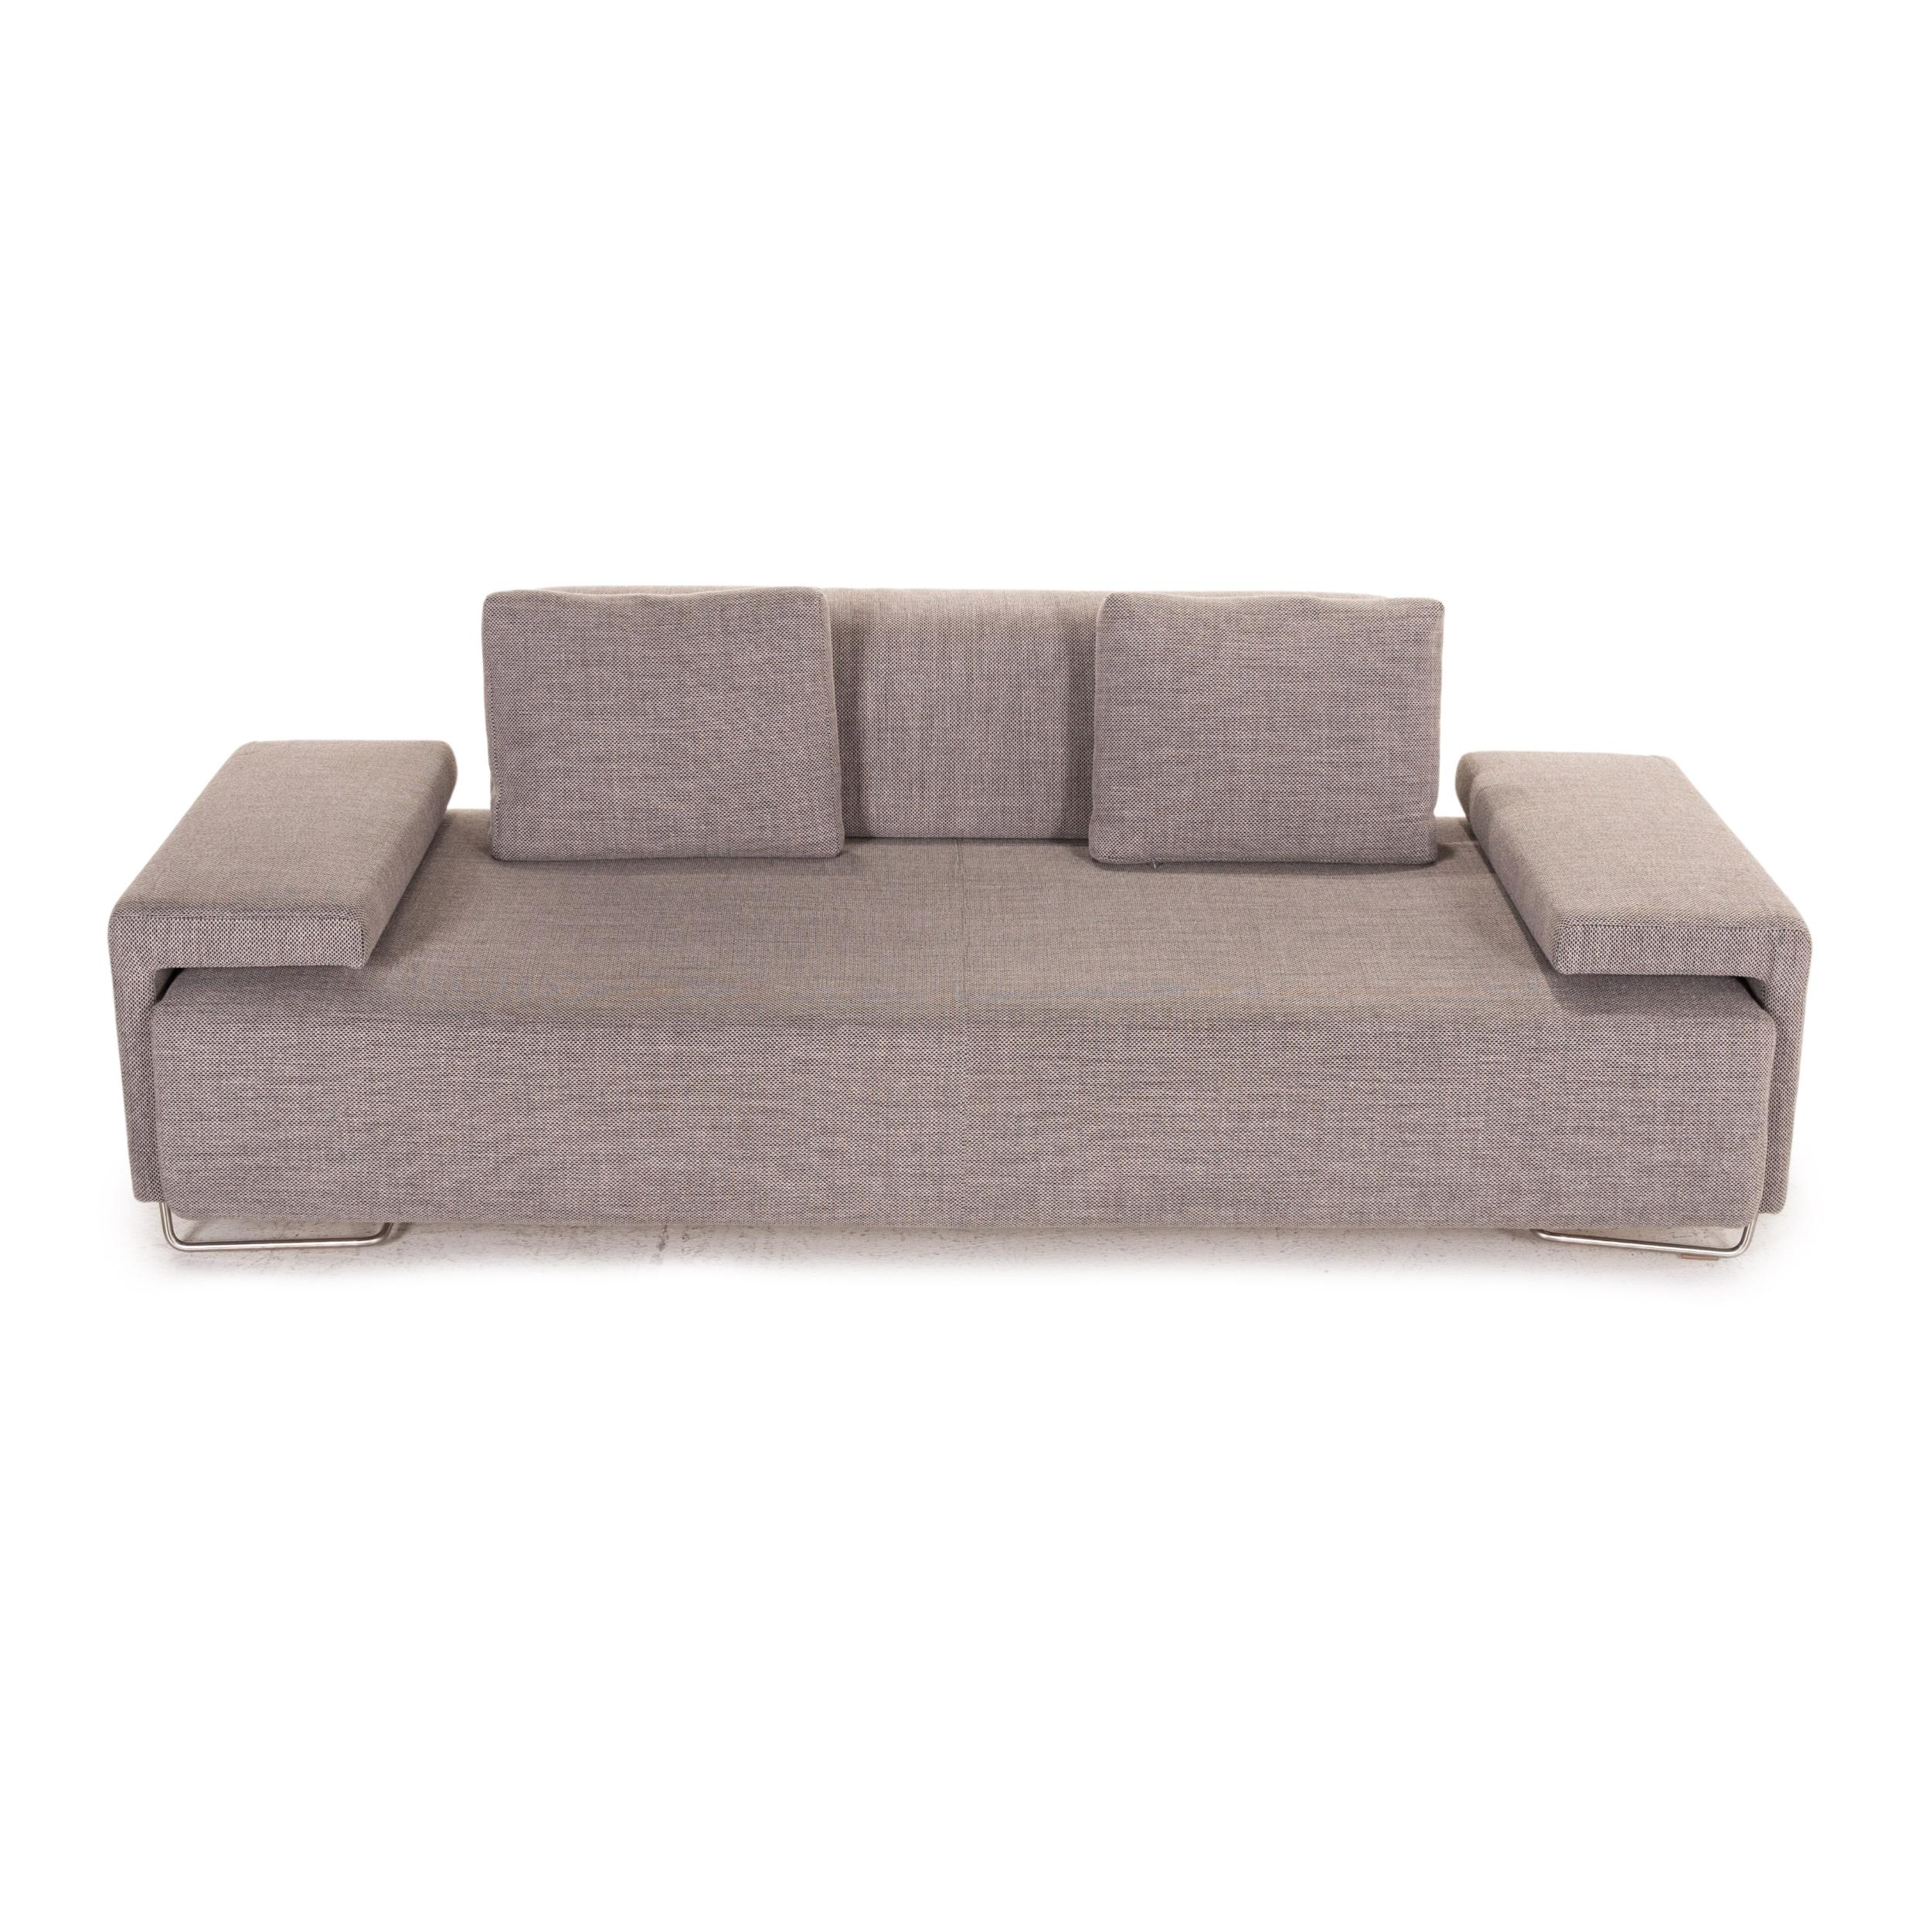 Moroso Lowland Fabric Sofa Three Seater Gray Couch In Fair Condition For Sale In Cologne, DE